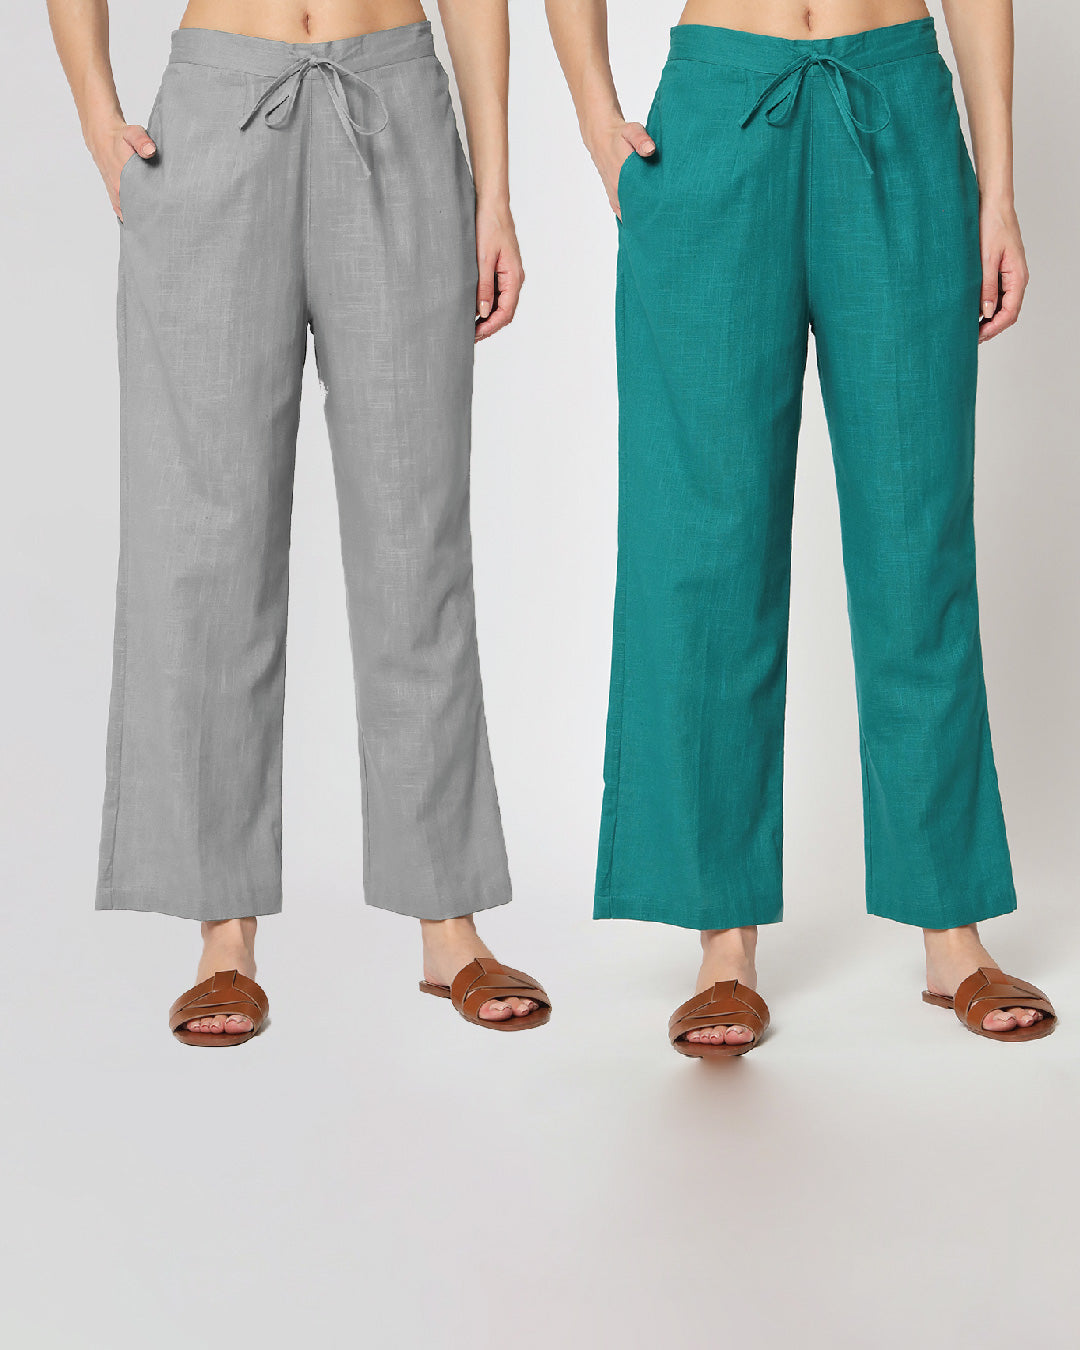 Combo: Iced Grey & Forest Green Straight Pants- Set of 2